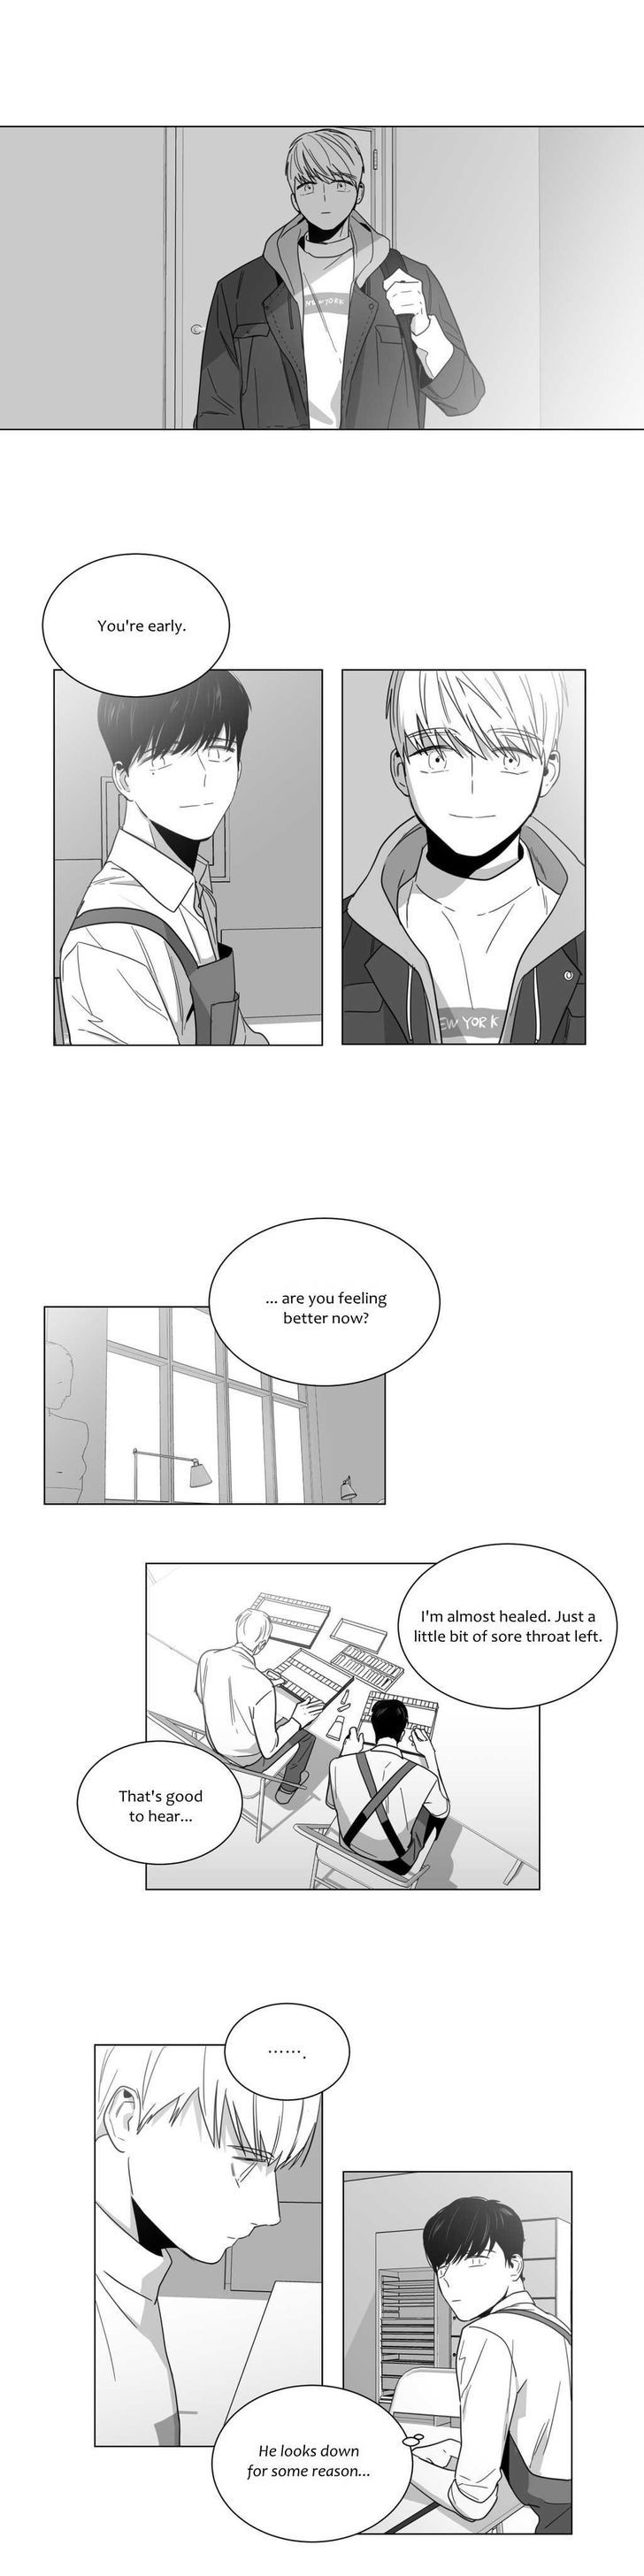 Lover Boy (Lezhin) Chapter 010 page 8